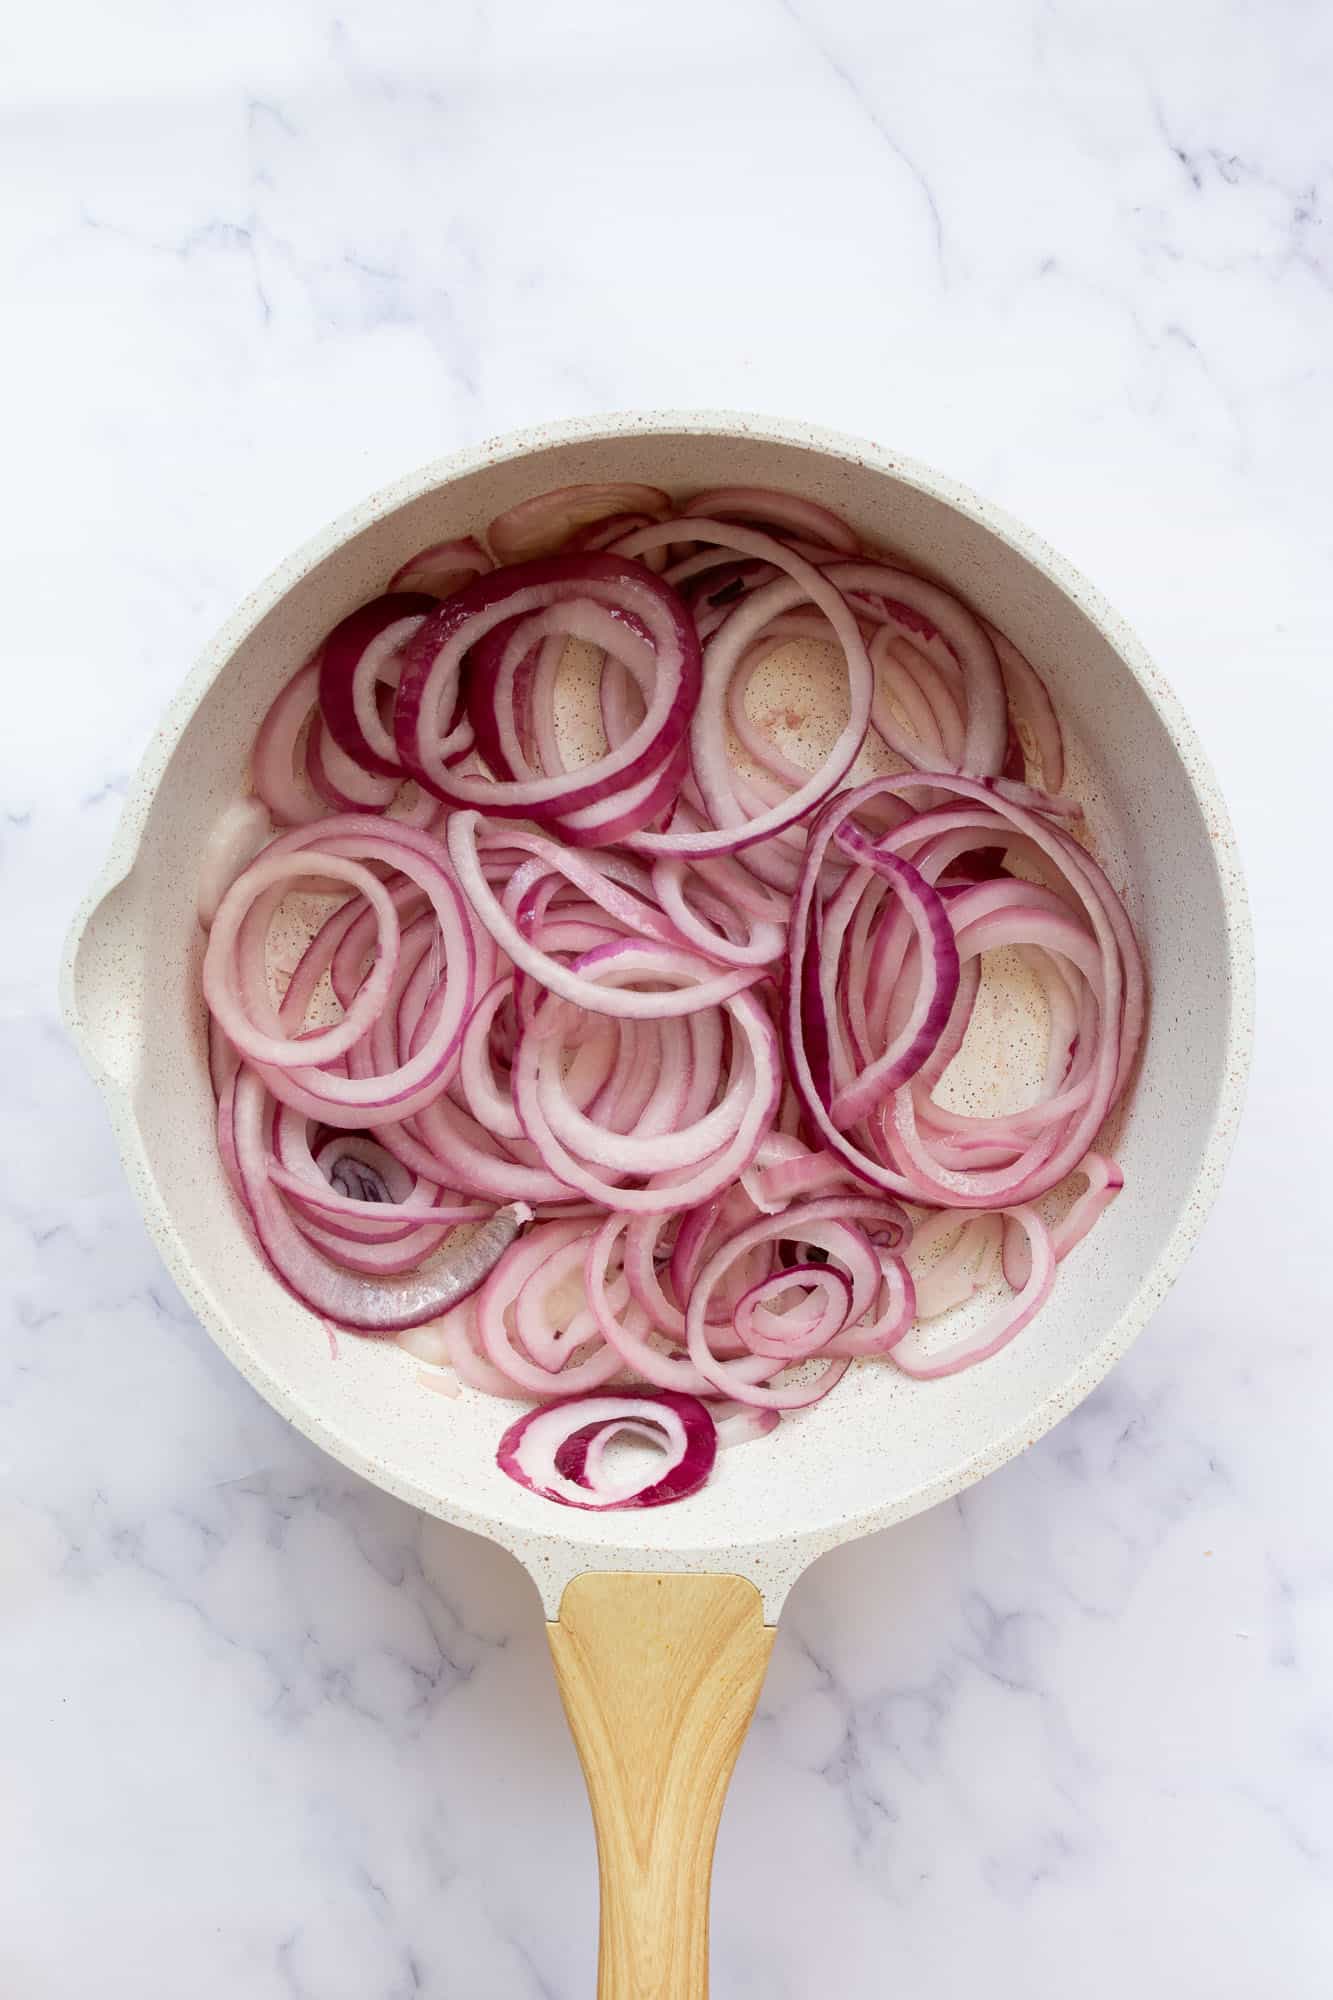 sauteed onions in a skillet